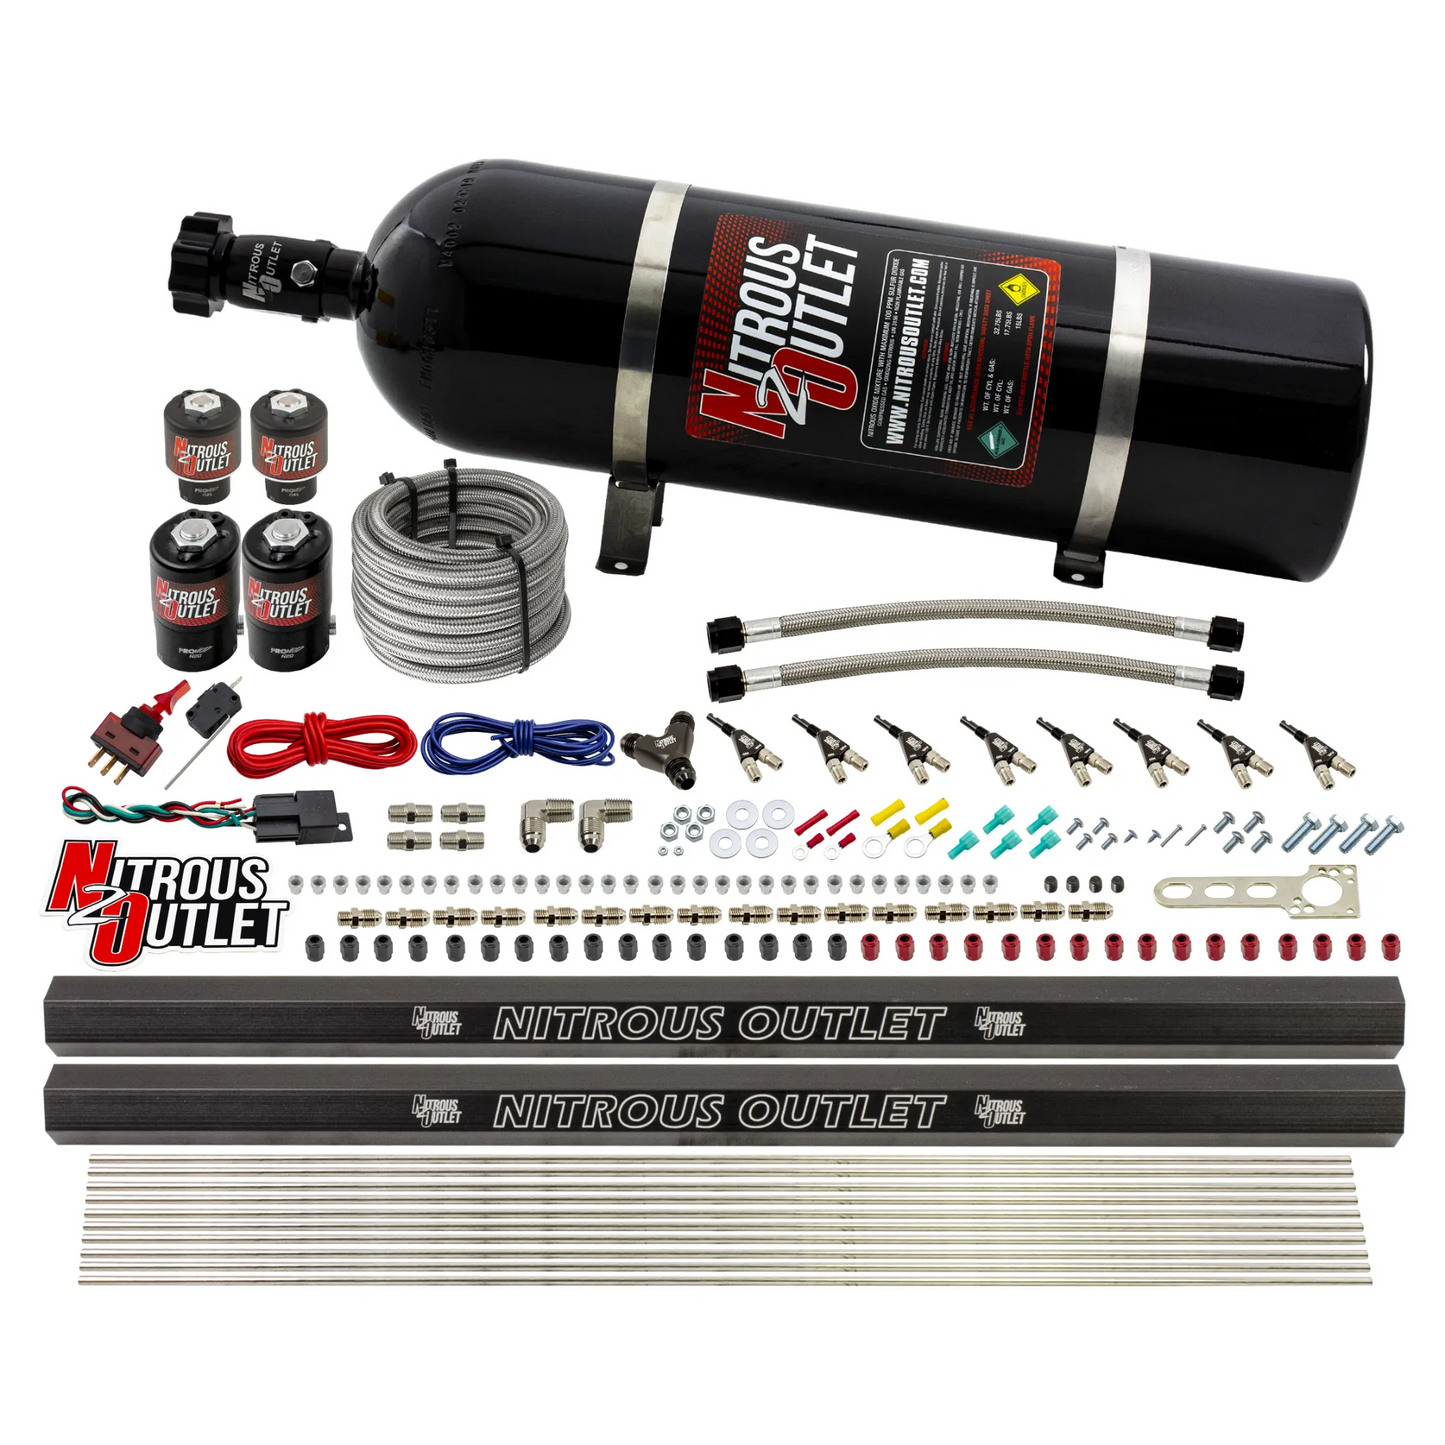 8 Cylinder Single Stage Direct Port Nitrous System with Injection Rails - Alcohol - .122 Nitrous/.177 Fuel